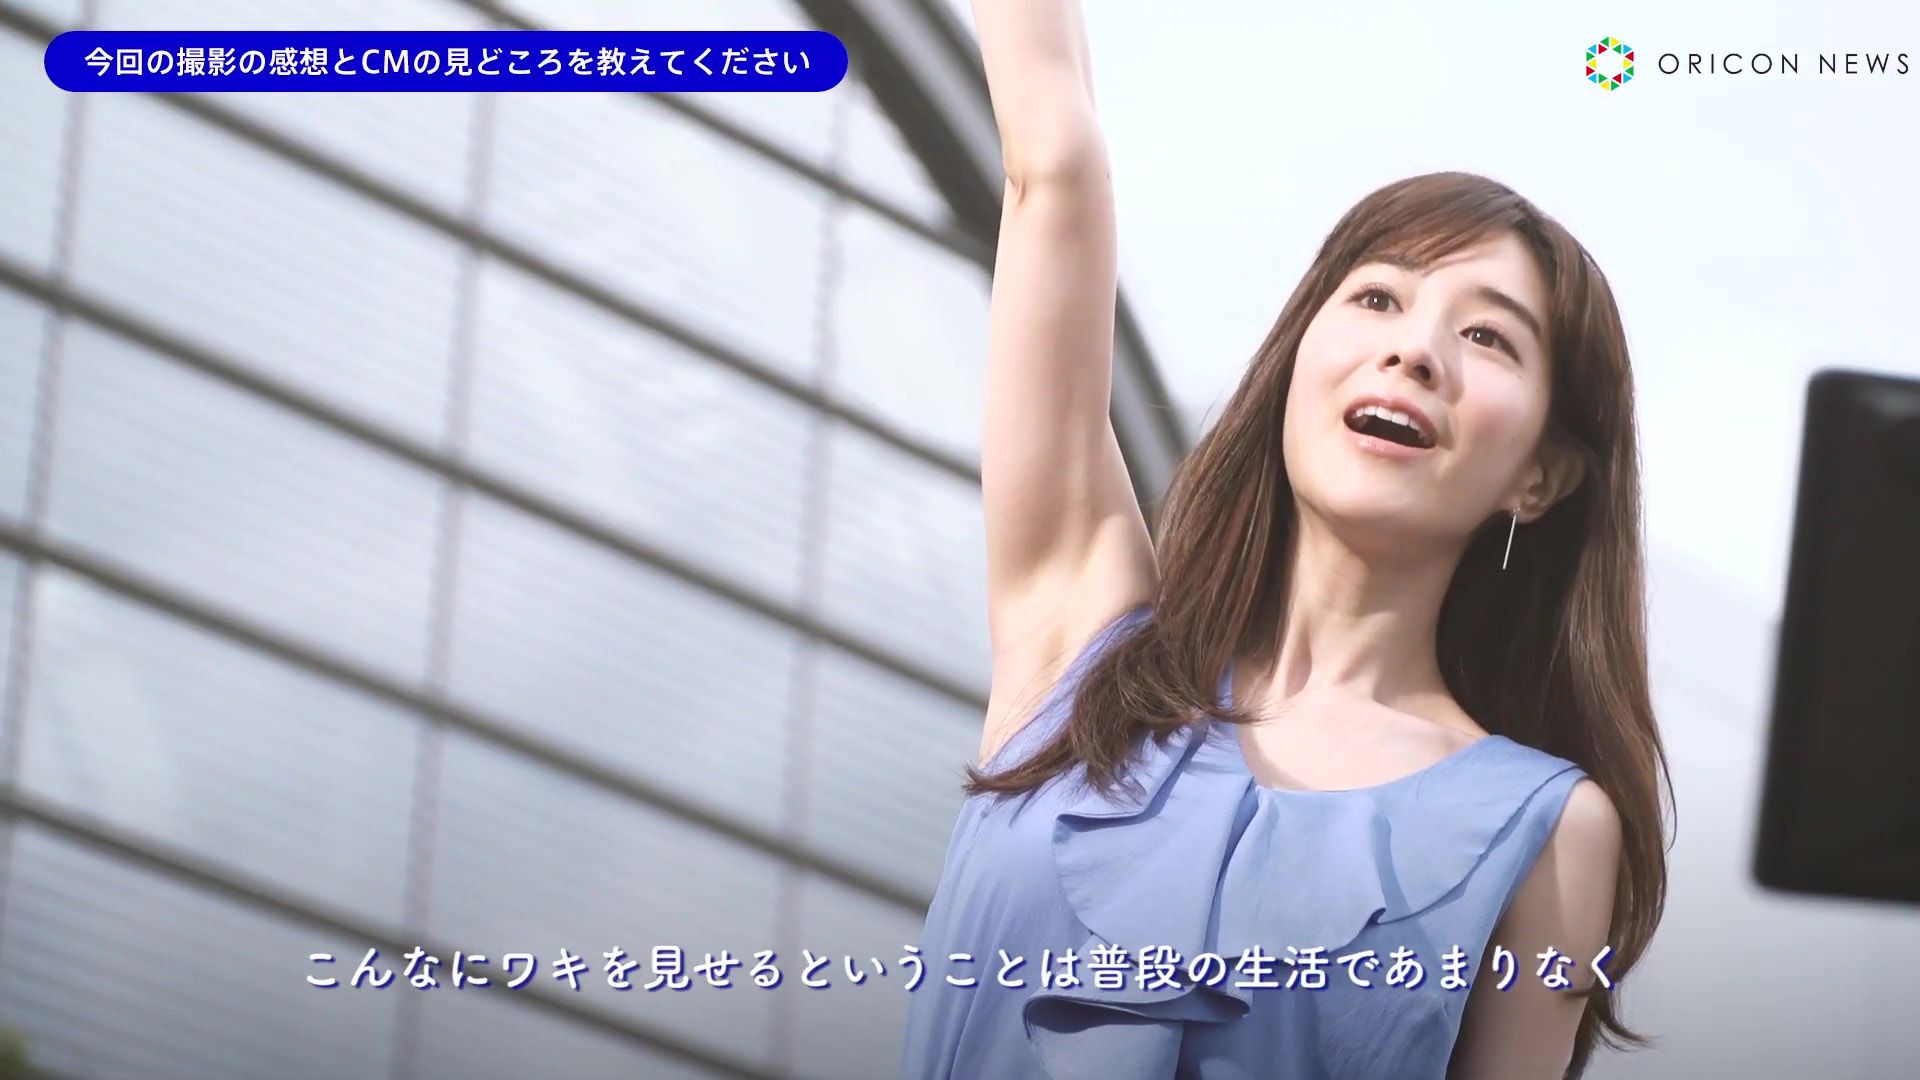 [Image] I'll show you the eroticism of Minami Tanaka 33 years old! and appeal does not stop wwwwww 5